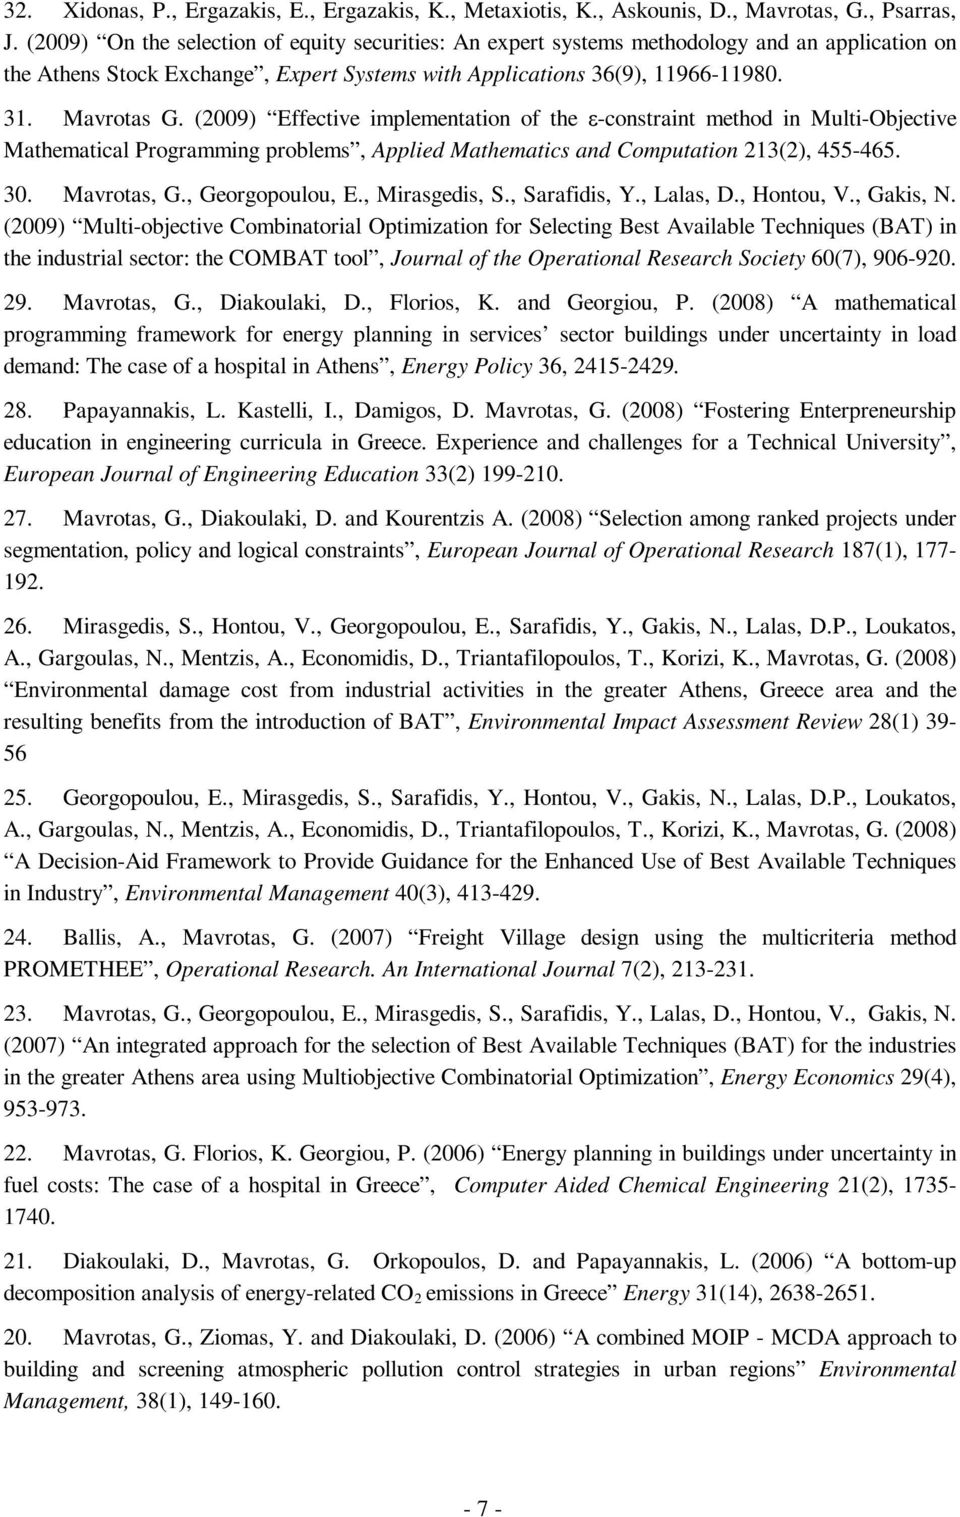 (2009) Effective implementation of the ε-constraint method in Multi-Objective Mathematical Programming problems, Applied Mathematics and Computation 213(2), 455-465. 30. Mavrotas, G., Georgopoulou, E.